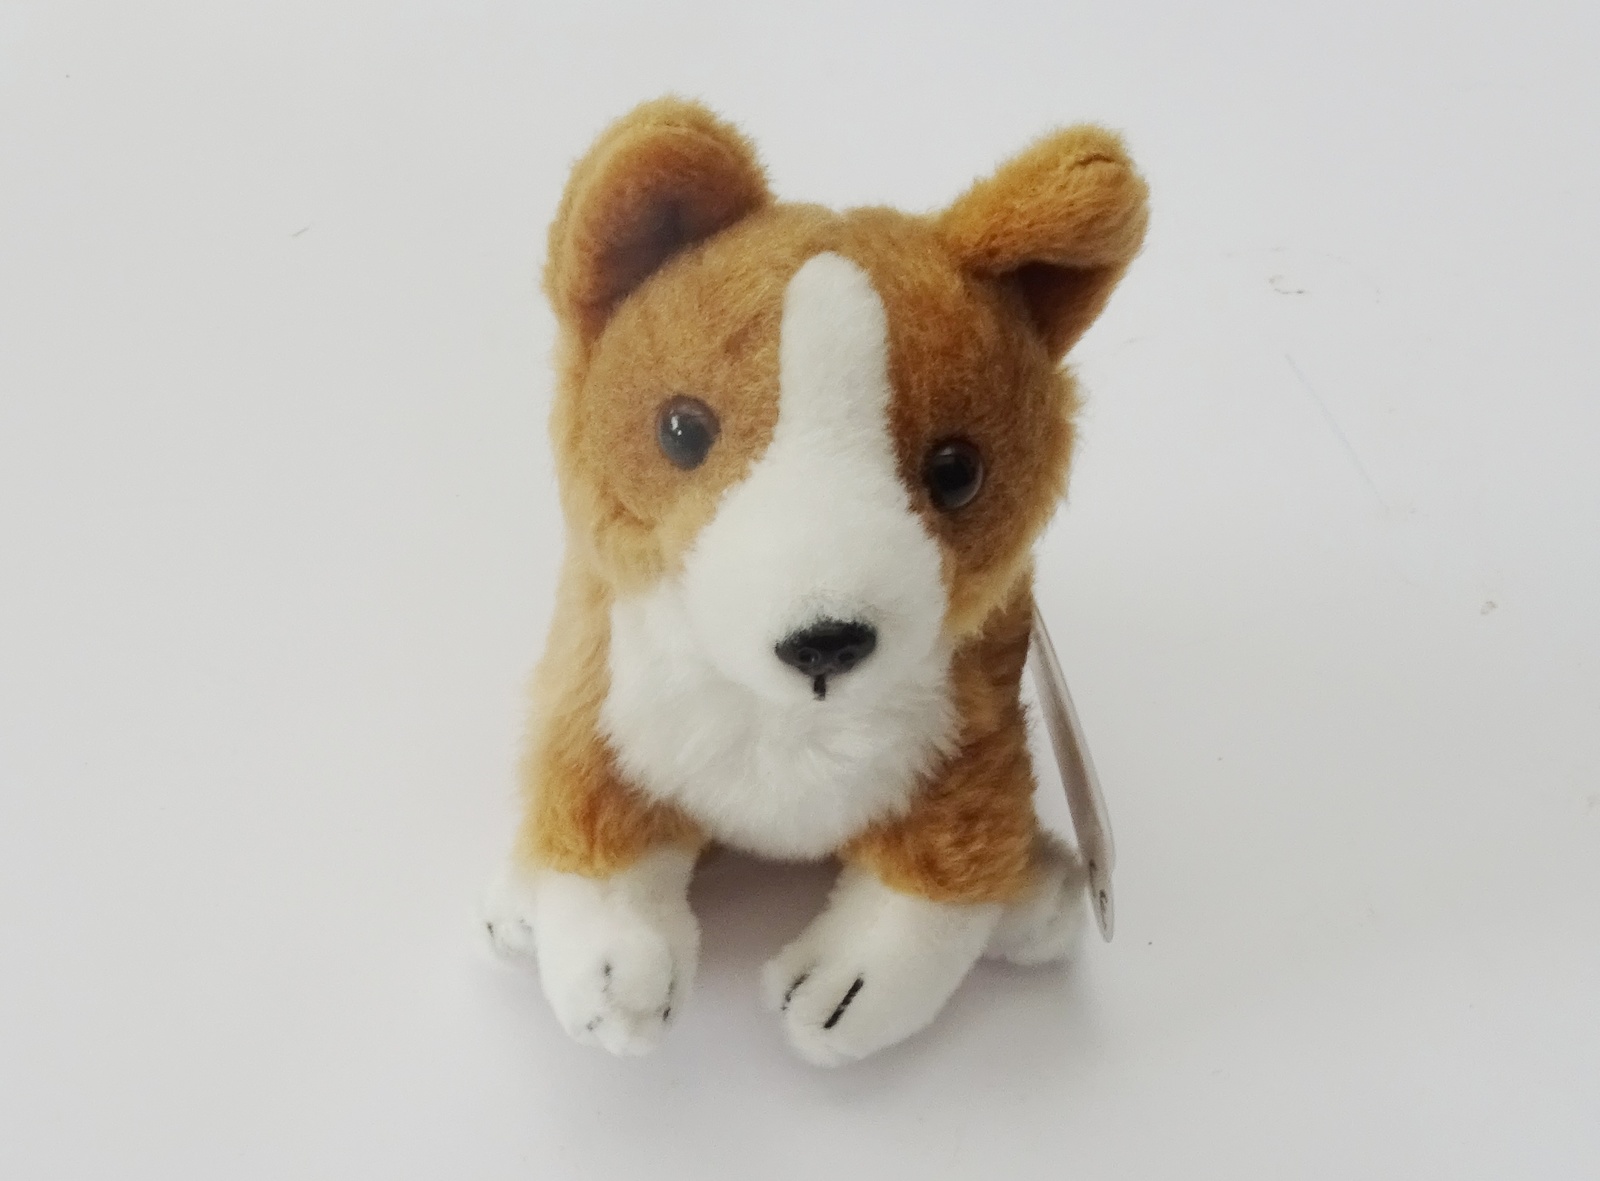 Welsh Corgi 12" tplushie as it is, gift wrapped, with personalised tag - $40.00 - $50.00